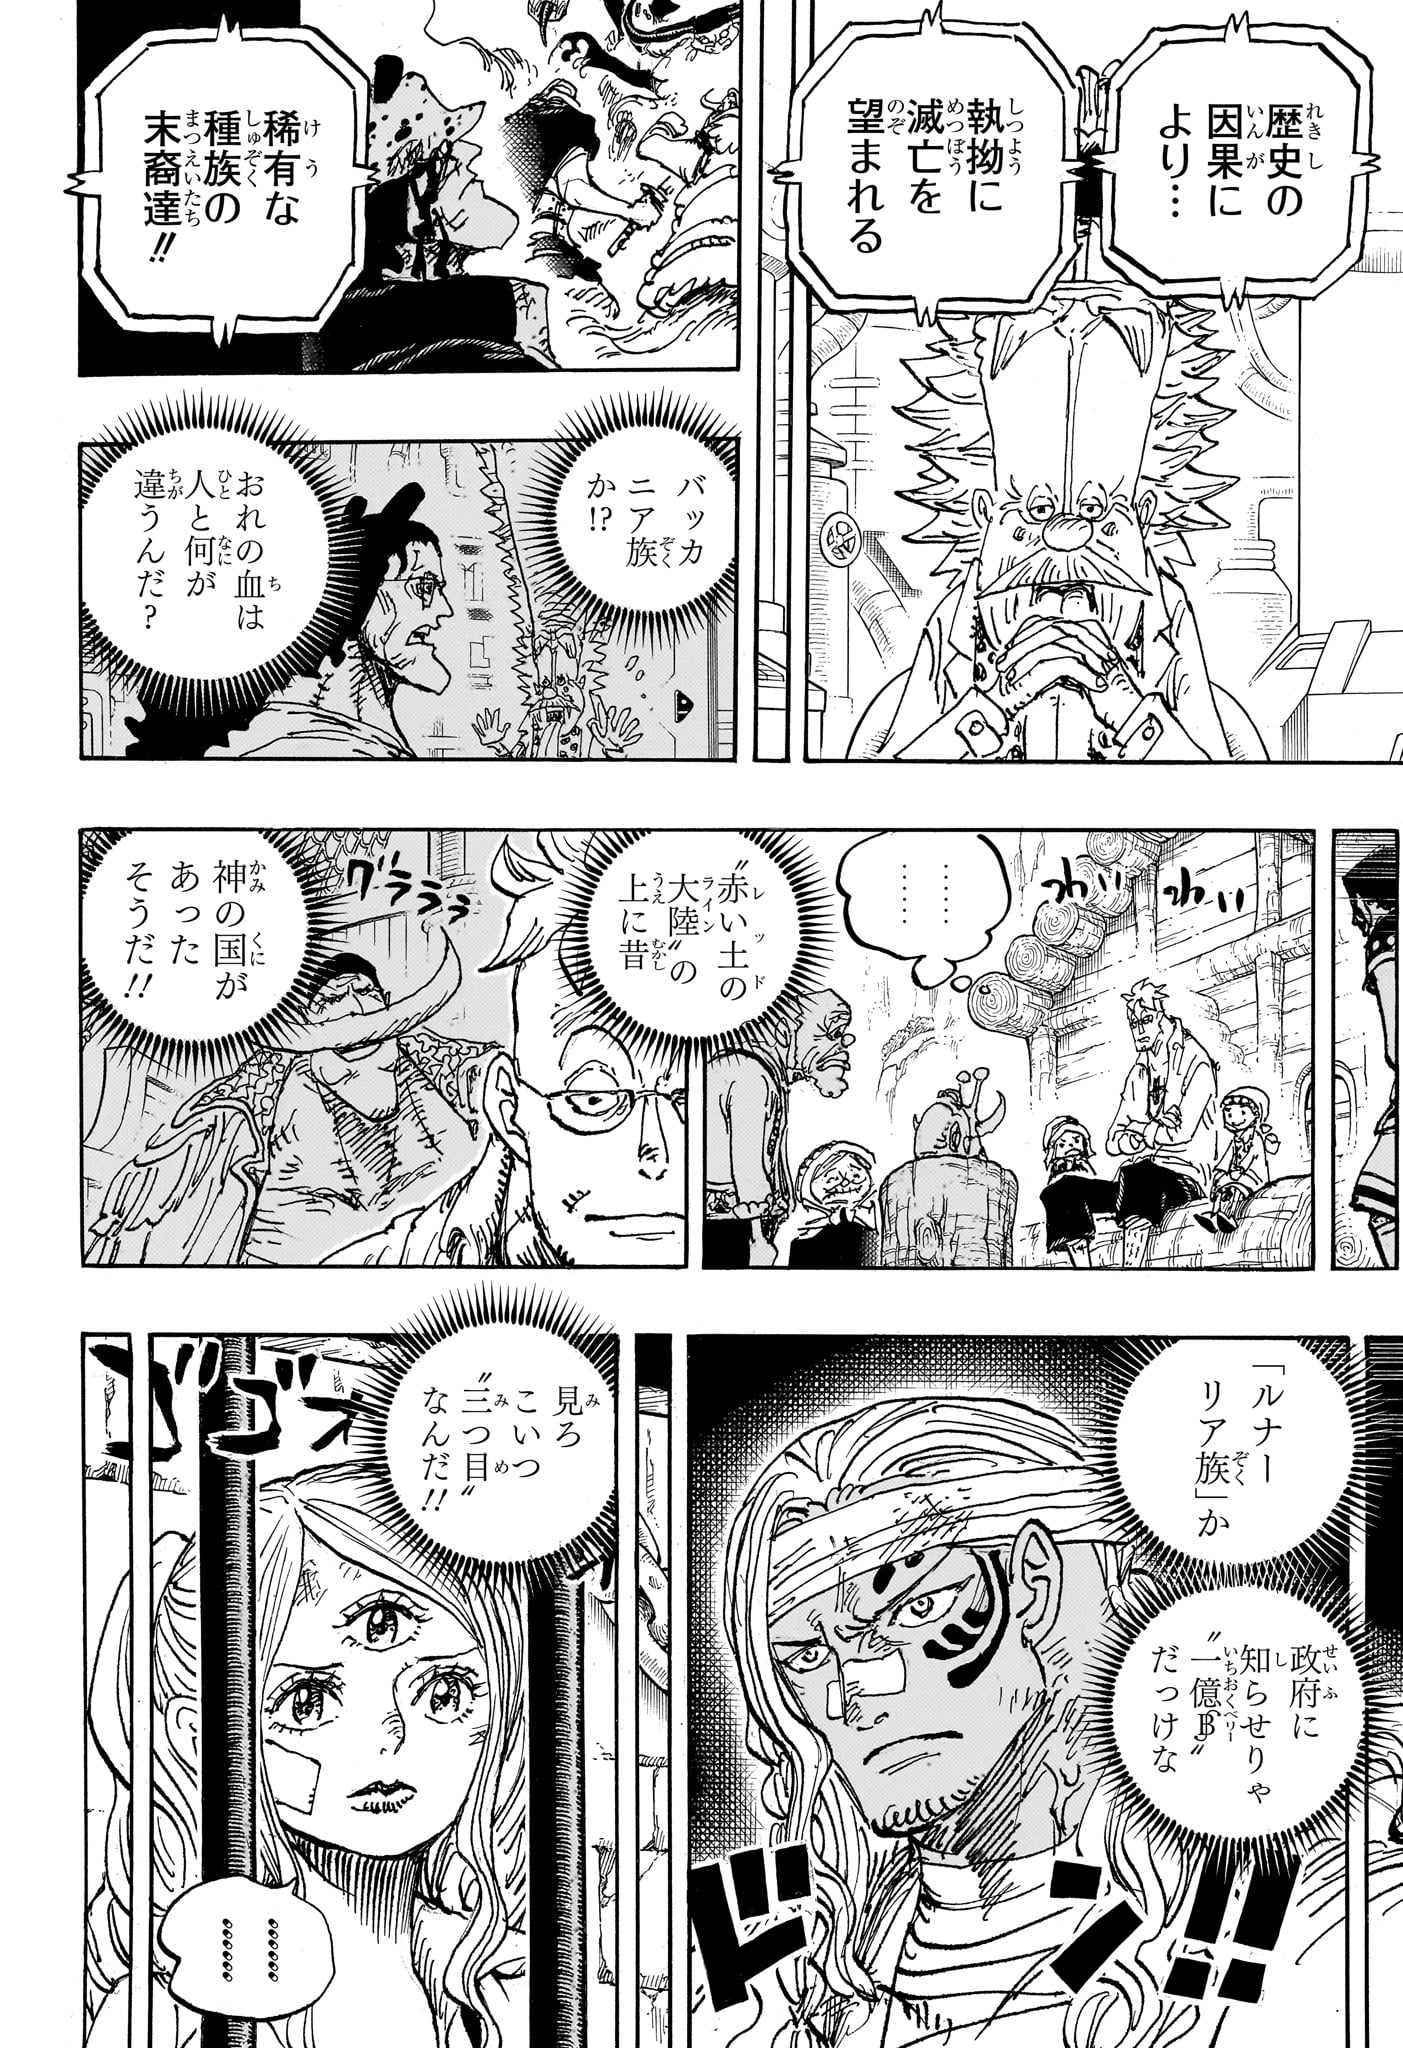 One Piece - Chapter 1121 - Page 7